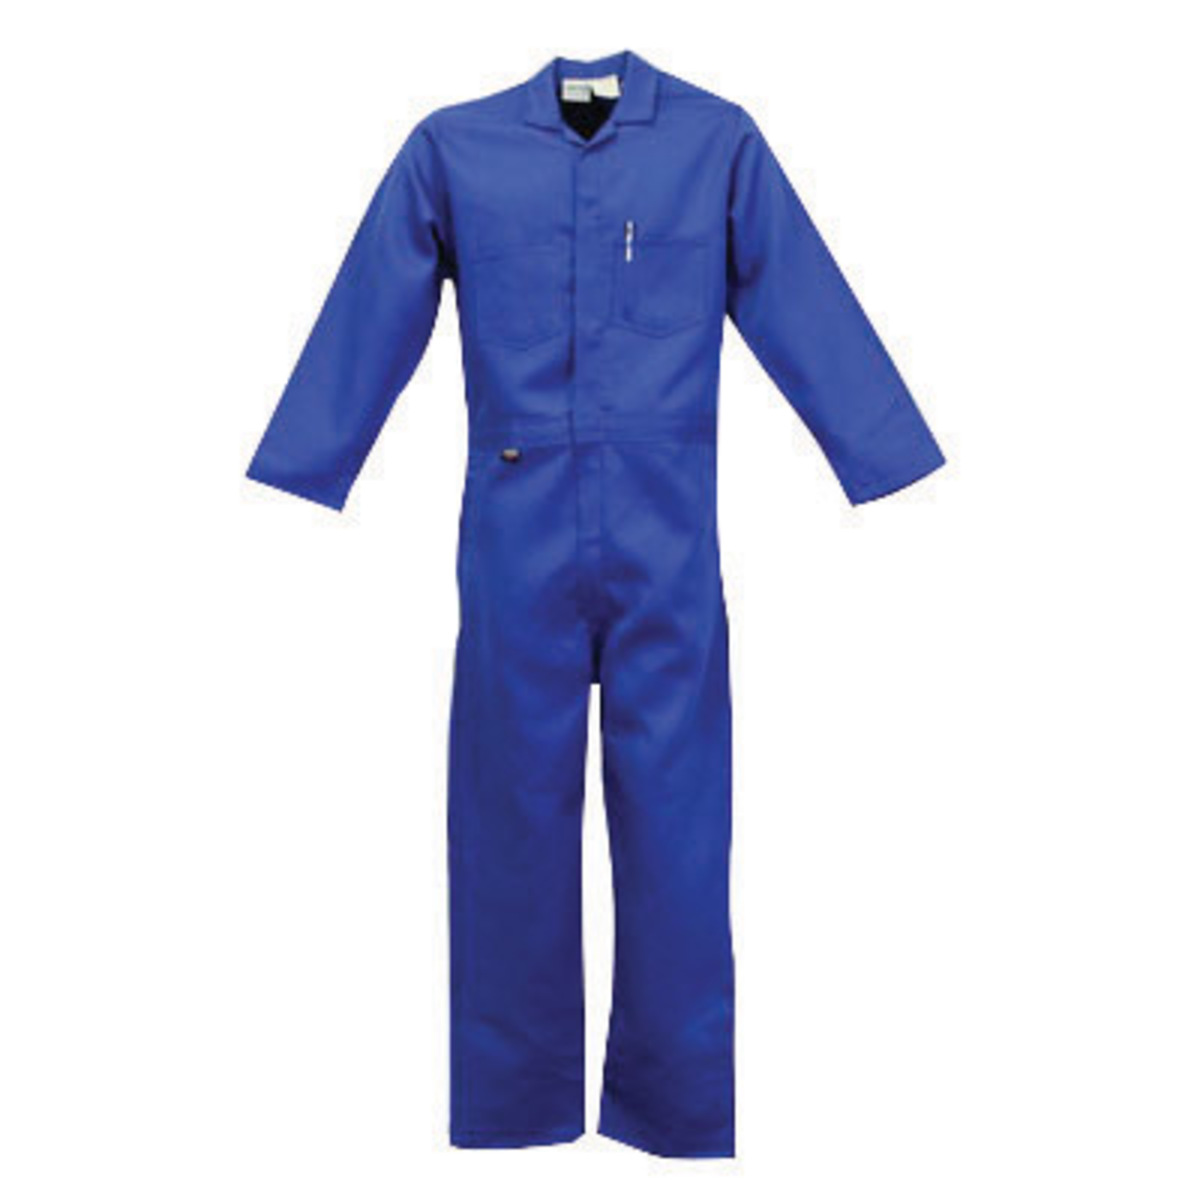 Stanco Safety Products™ Size 2X Royal Blue Indura® UltraSoft® Arc Rated Flame Resistant Coveralls With Front Zipper Closure